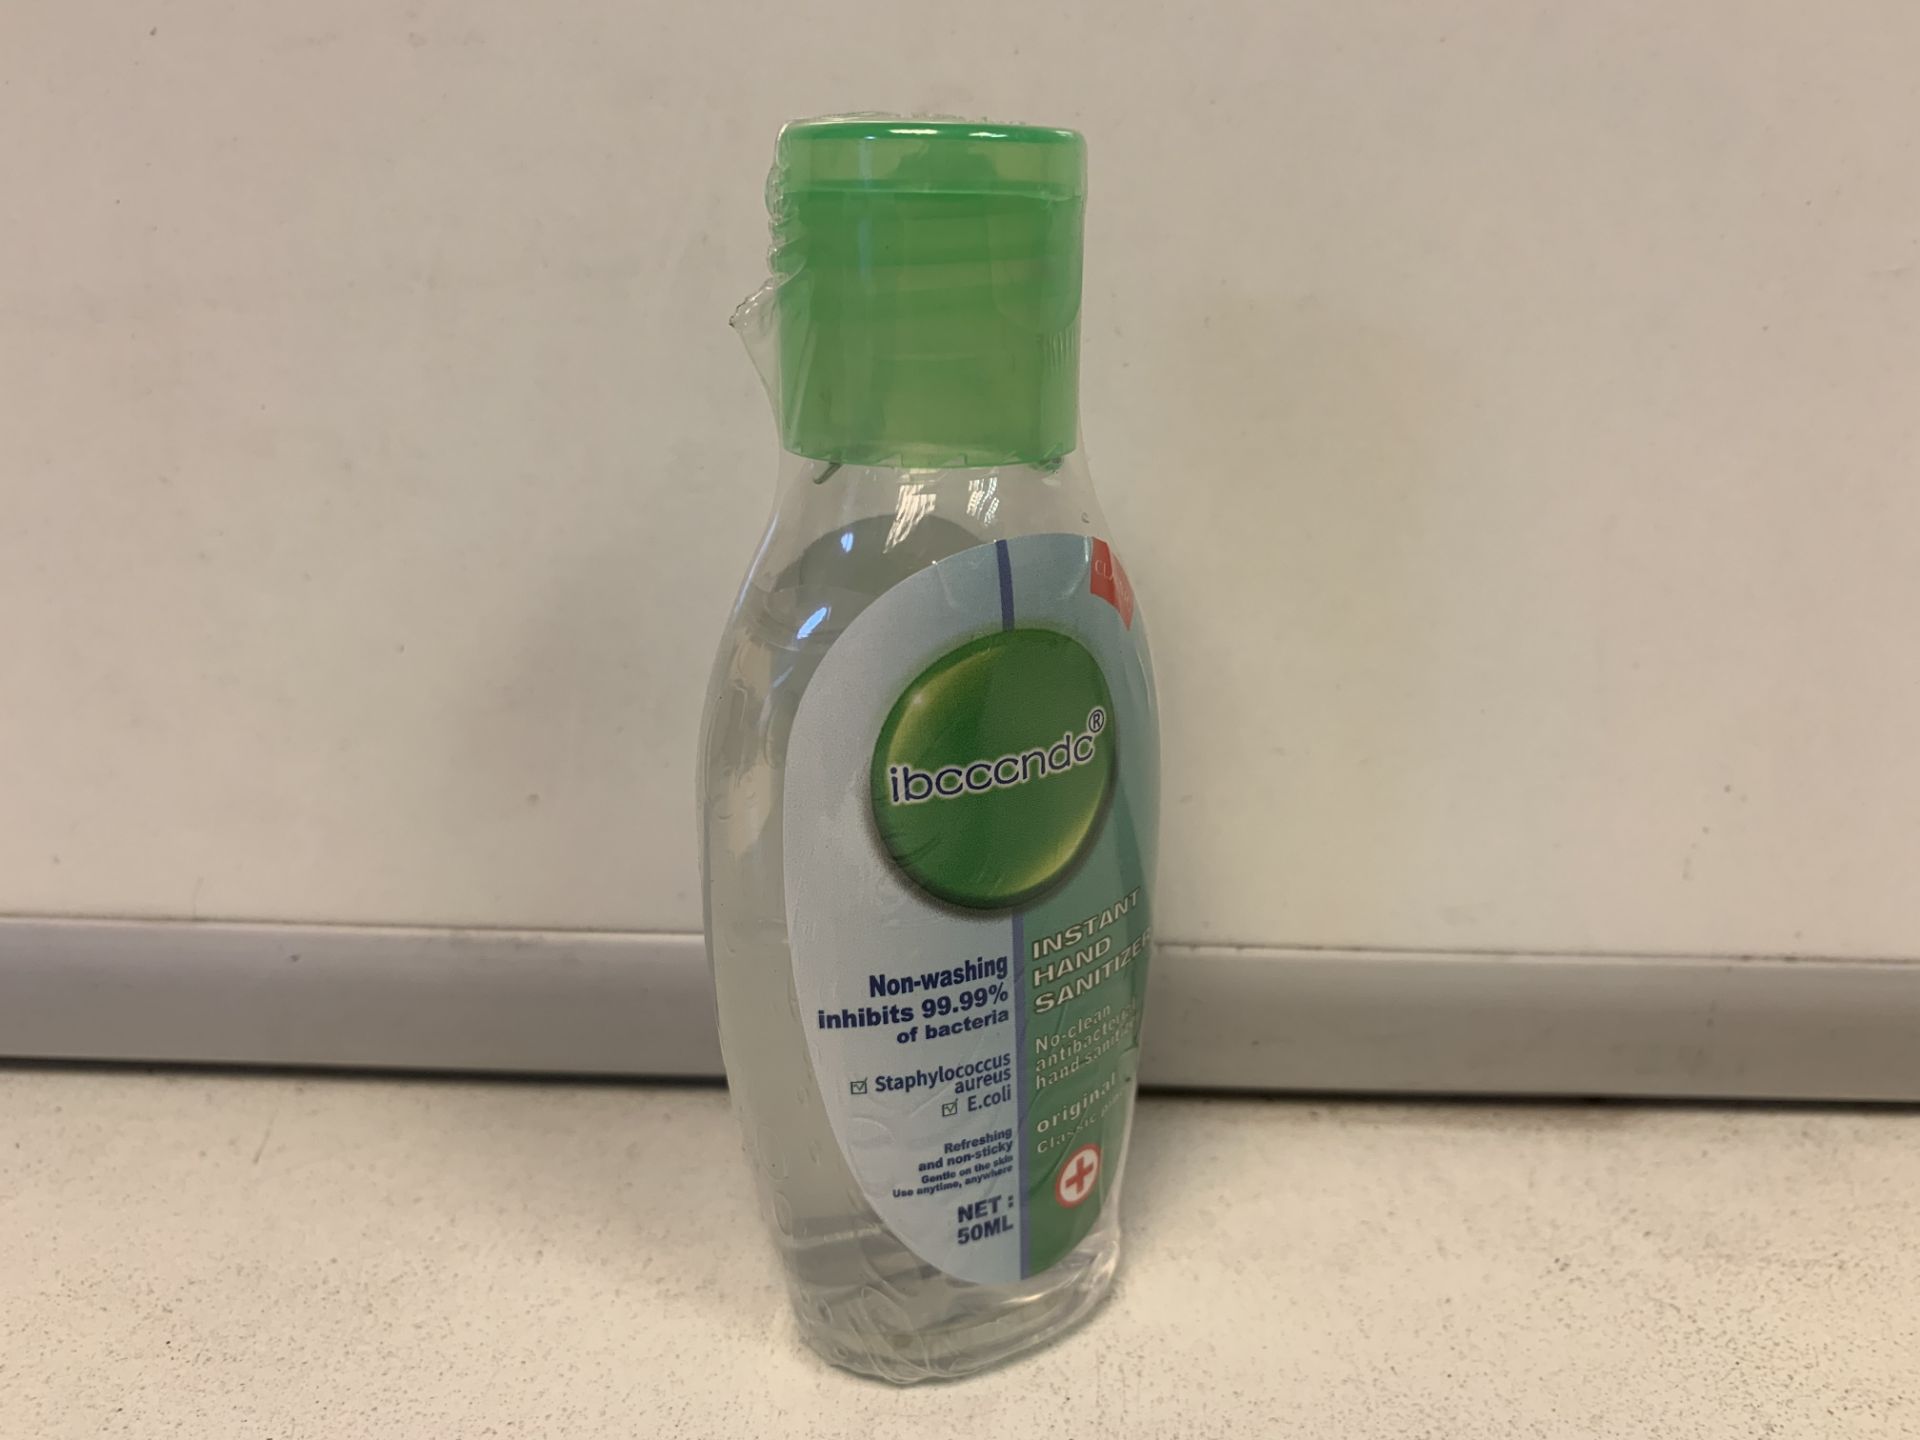 400 X NEW SEALED 50ML INSTANT HAND SANITISER. NON WASHING INHIBITS 99.9% OF BACTERIA.